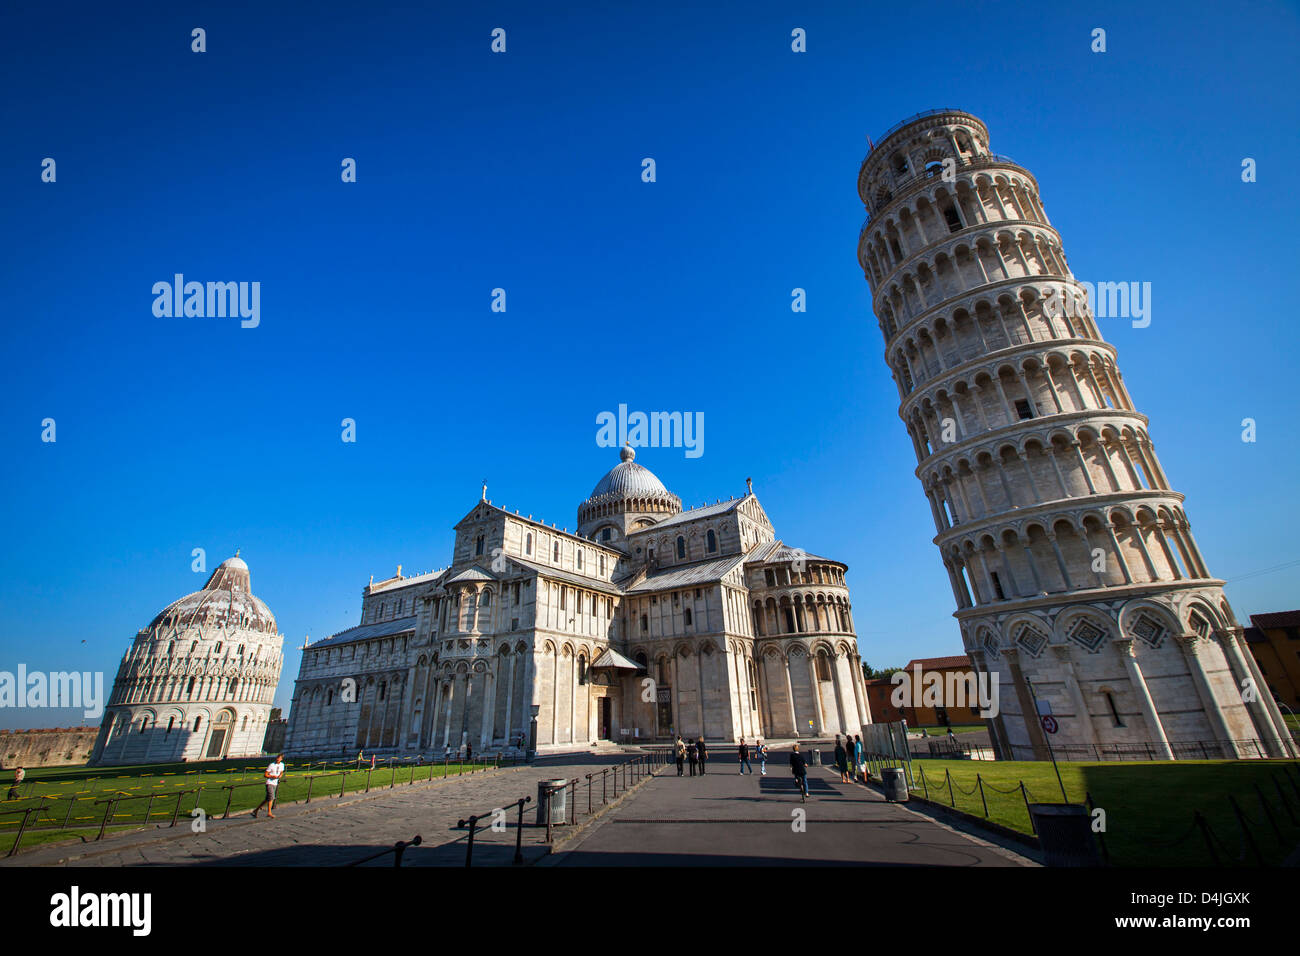 Piazza dei Miracoli and the Leaning Tower of Pisa, Italy Stock Photo